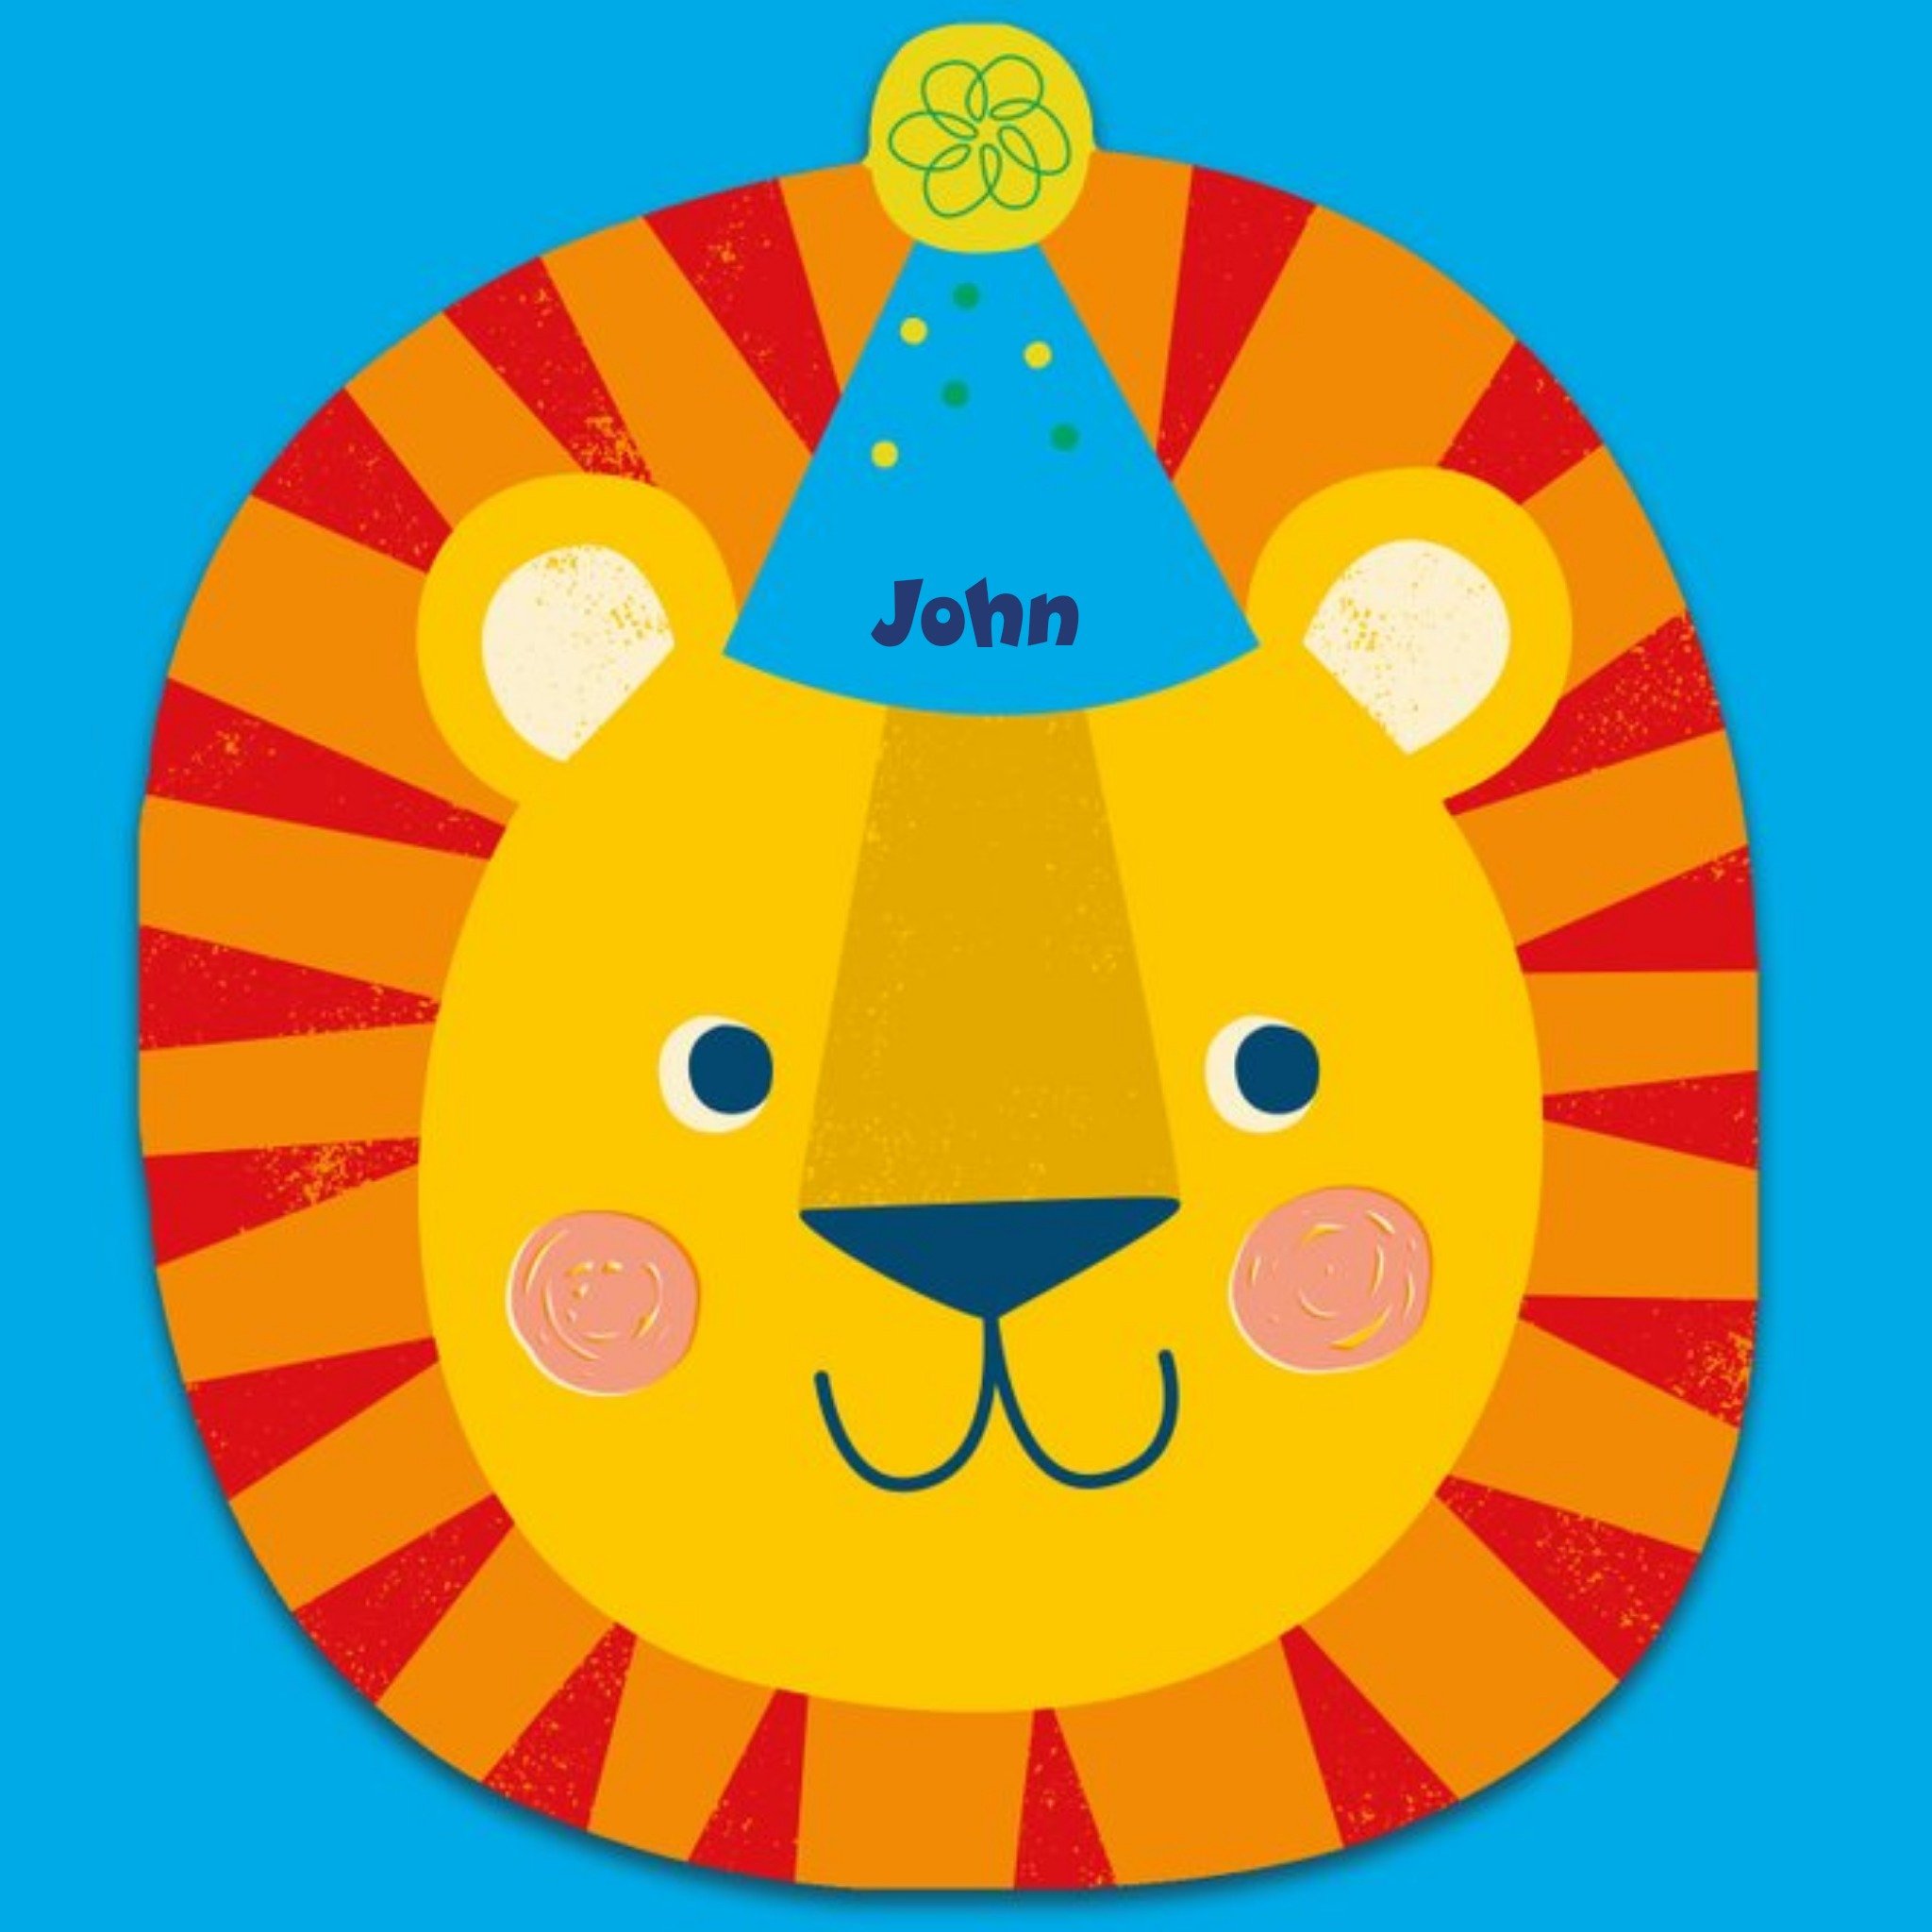 Moonpig Cartoon Illustration Of A Lion On A Blue Background Birthday Card, Large